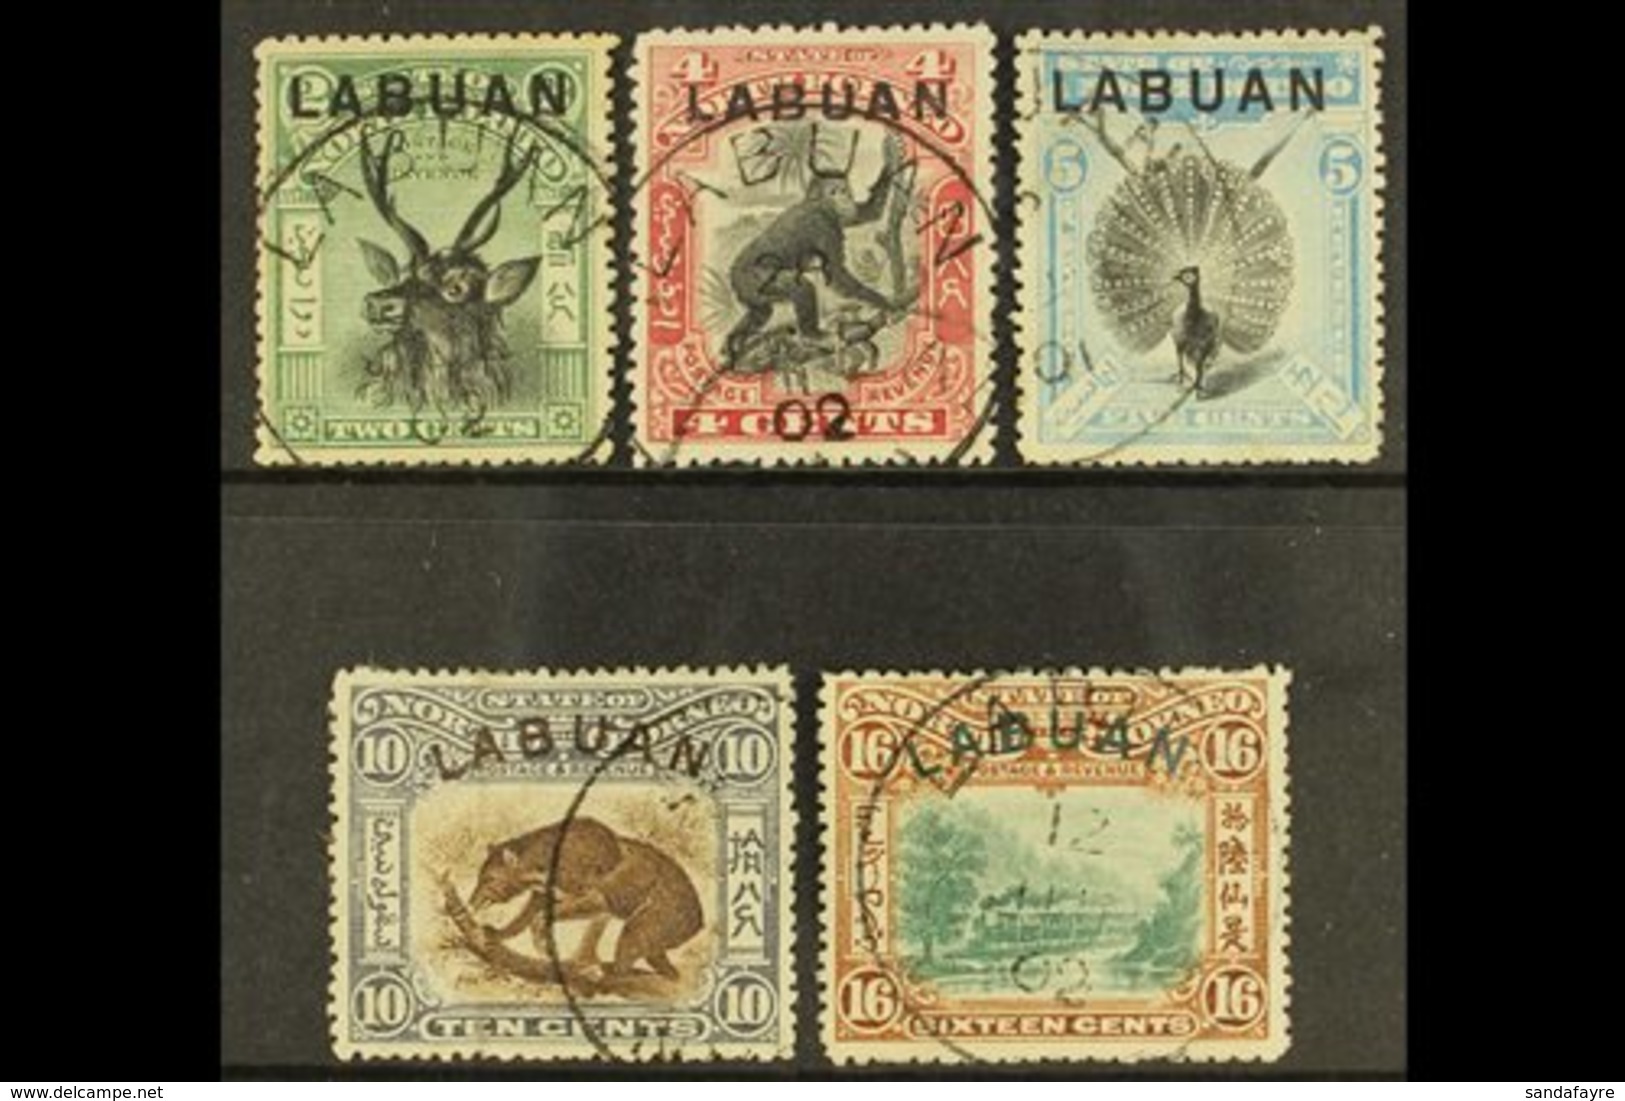 1900-02  Pictorial 2c, 4c Carmine, 5c, 10c And 16c, Between SG 111/116, Cds Used. (5 Stamps) For More Images, Please Vis - North Borneo (...-1963)